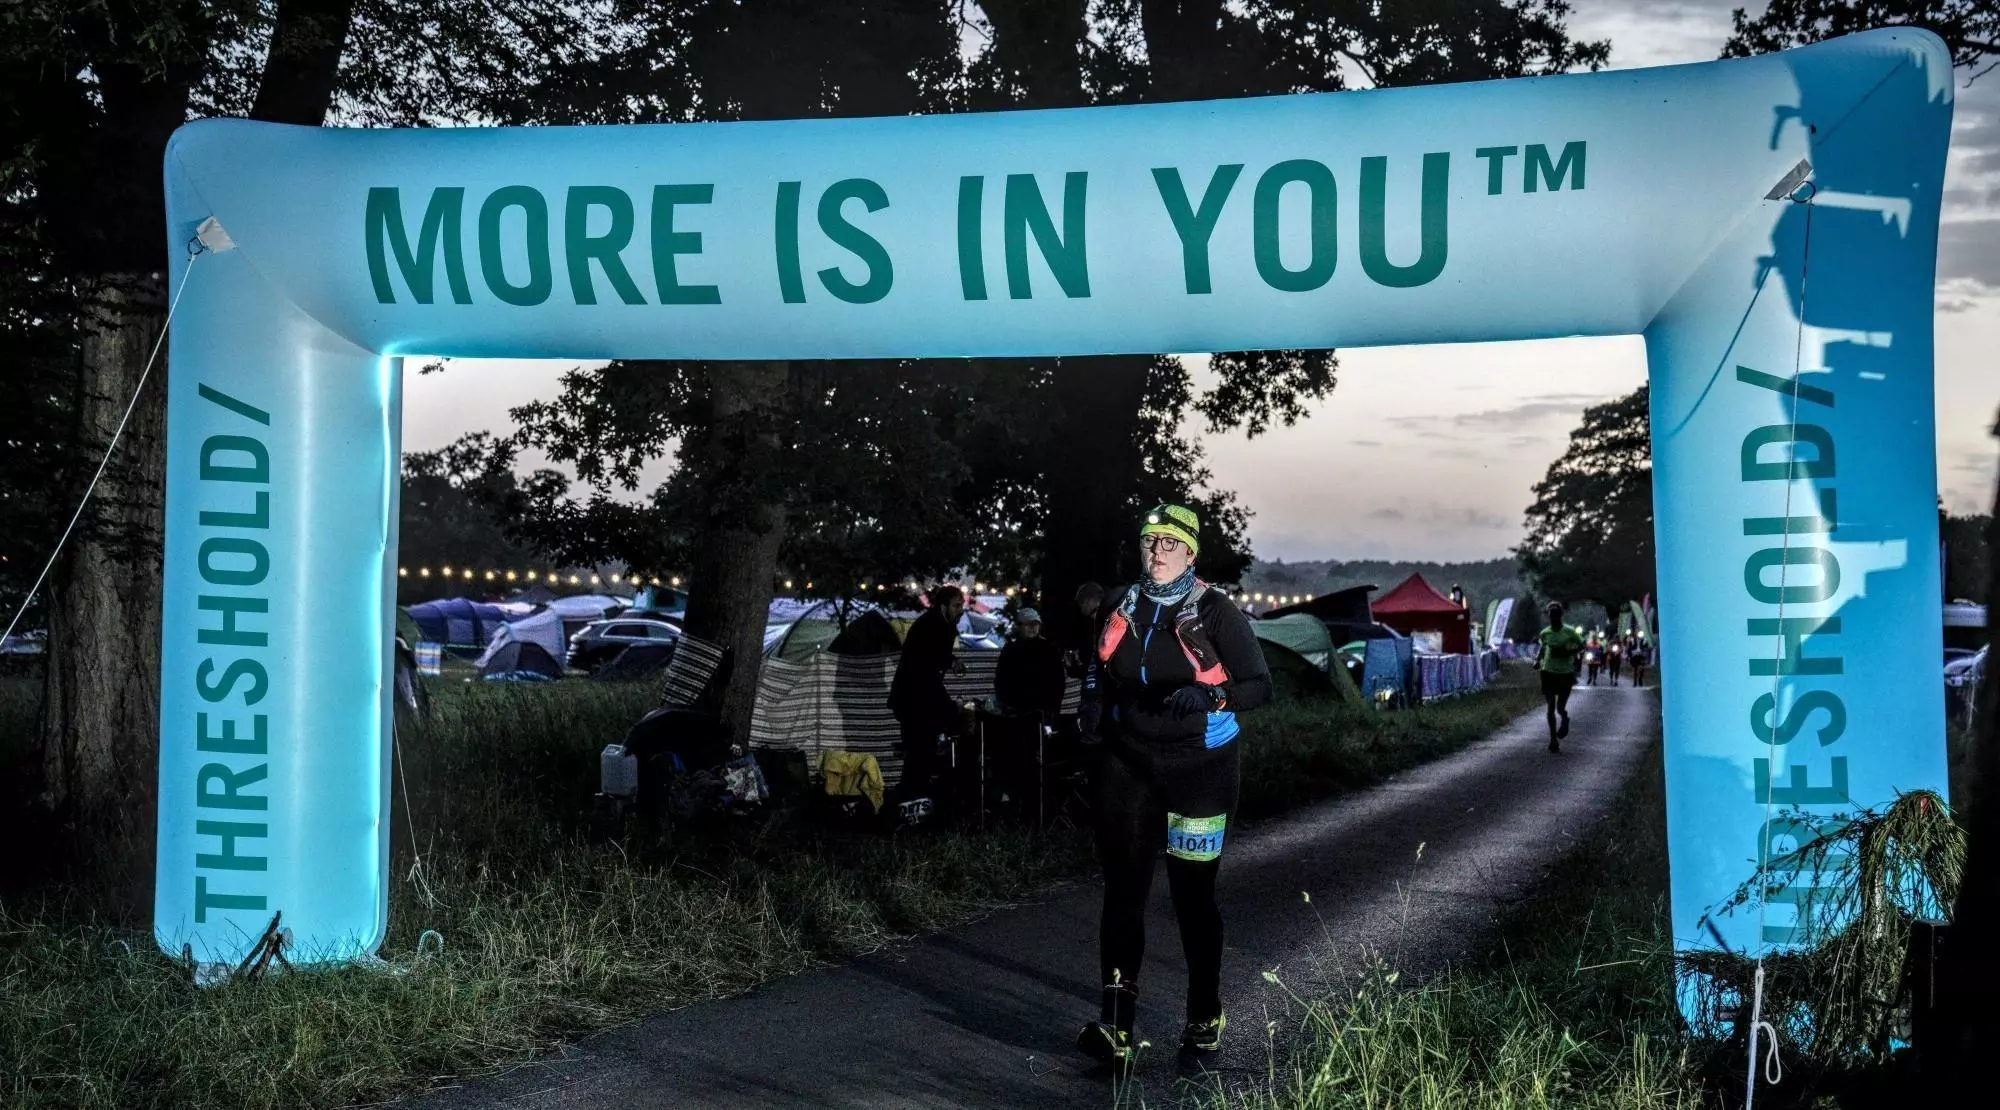 Photo of Ruth running at dawn with a headtorch under an illuminated arch saying 'More is in you'.